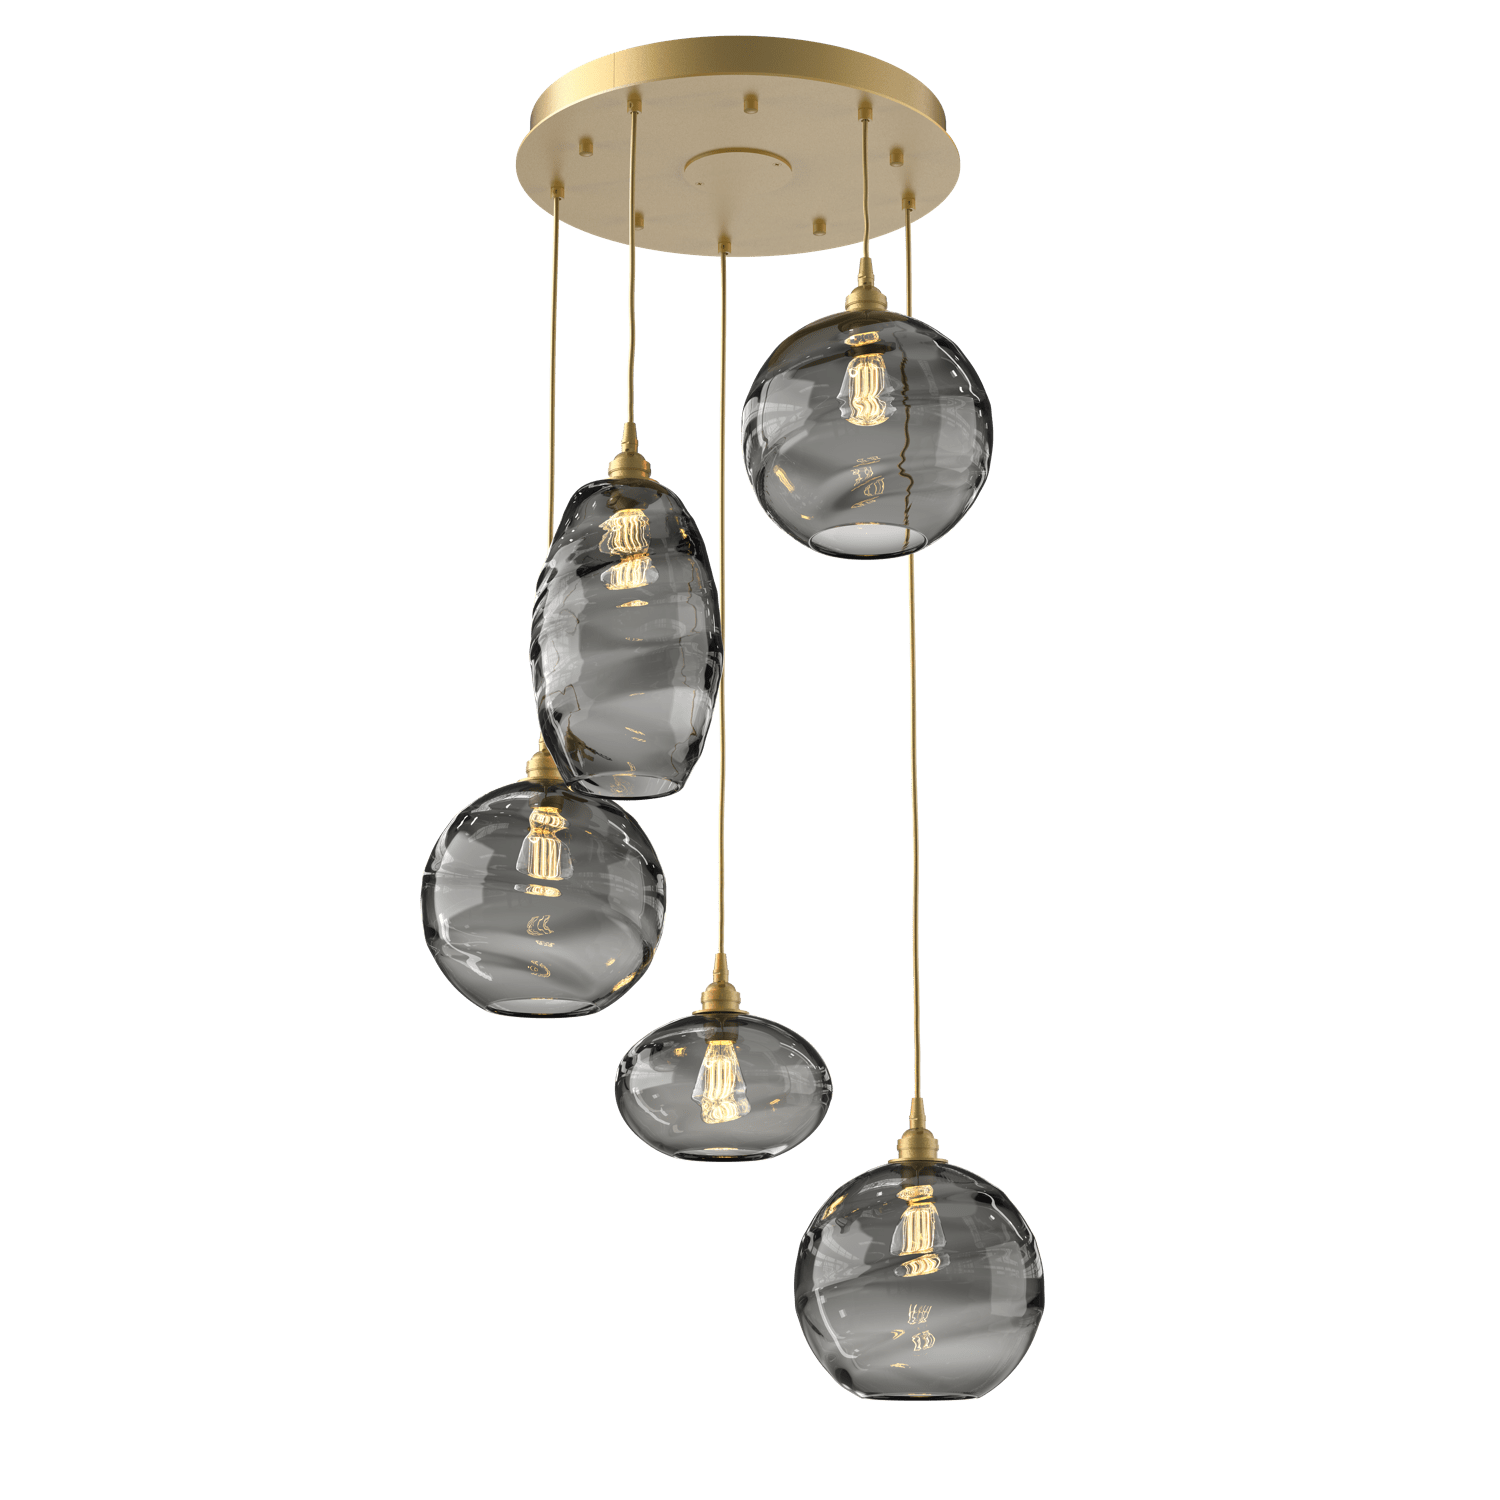 CHB0048-05-GB-OS-Hammerton-Studio-Optic-Blown-Glass-Misto-5-light-round-pendant-chandelier-with-gilded-brass-finish-and-optic-smoke-blown-glass-shades-and-incandescent-lamping